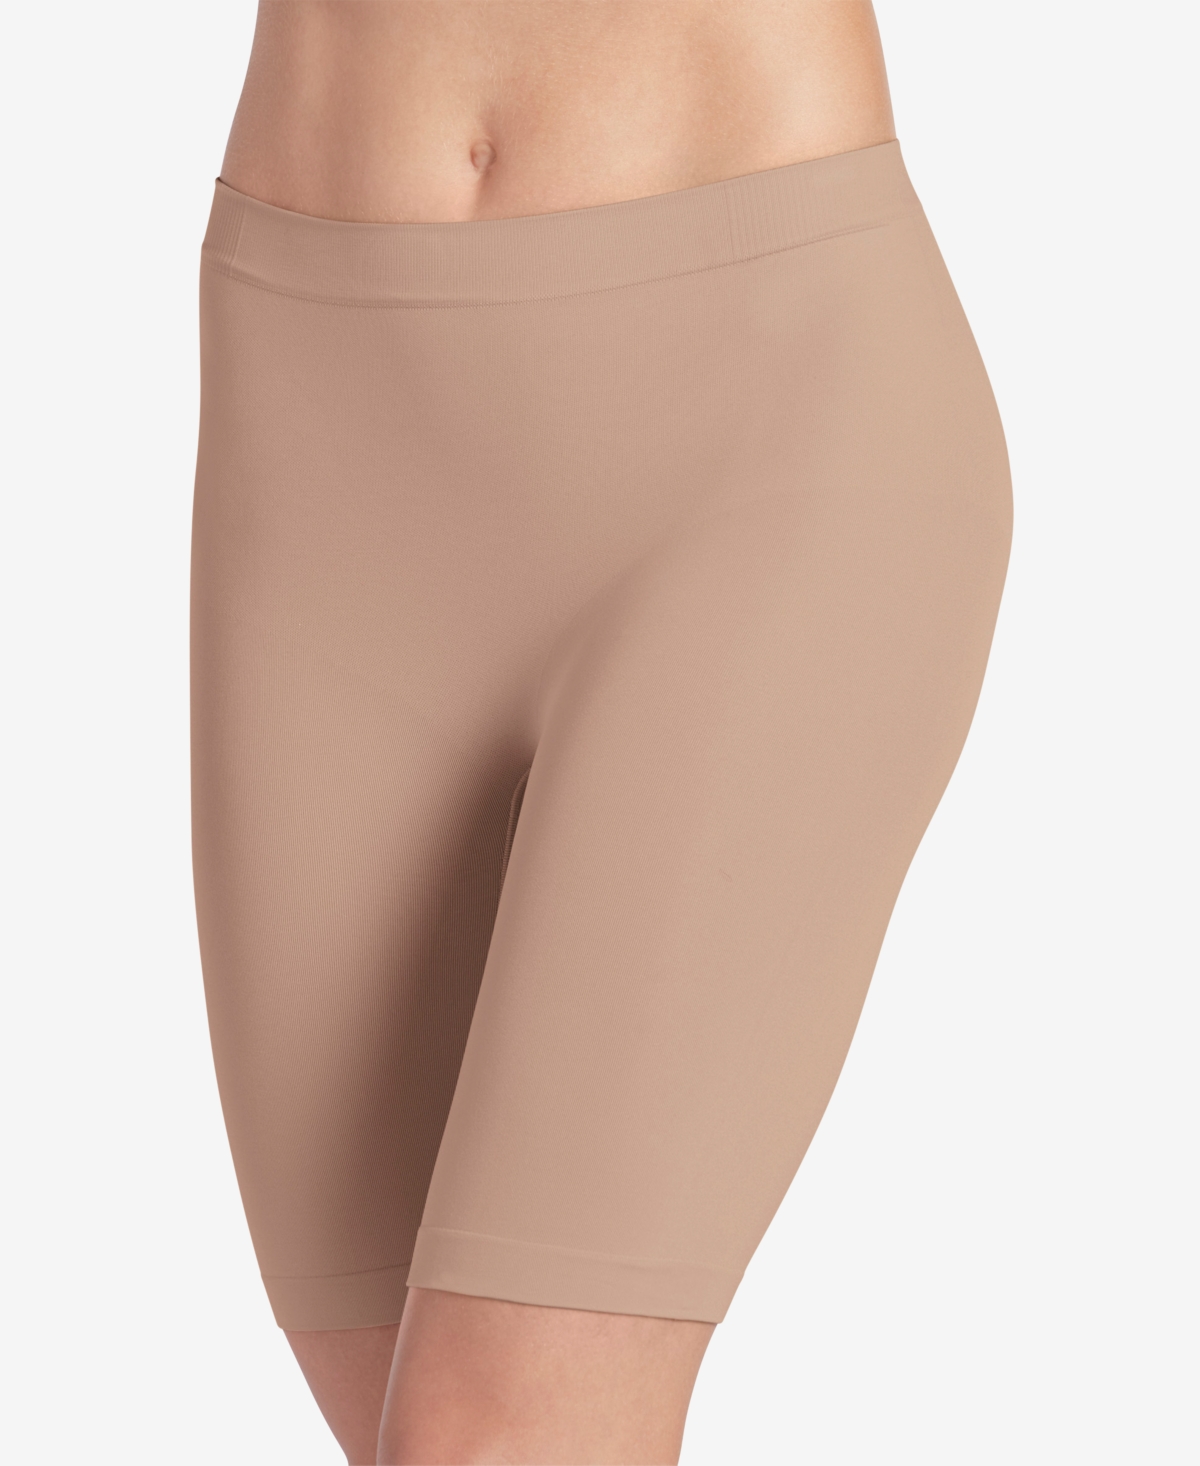 Skimmies No-Chafe Mid-Thigh Slip Short, available in extended sizes 2109 - Light (Nude )